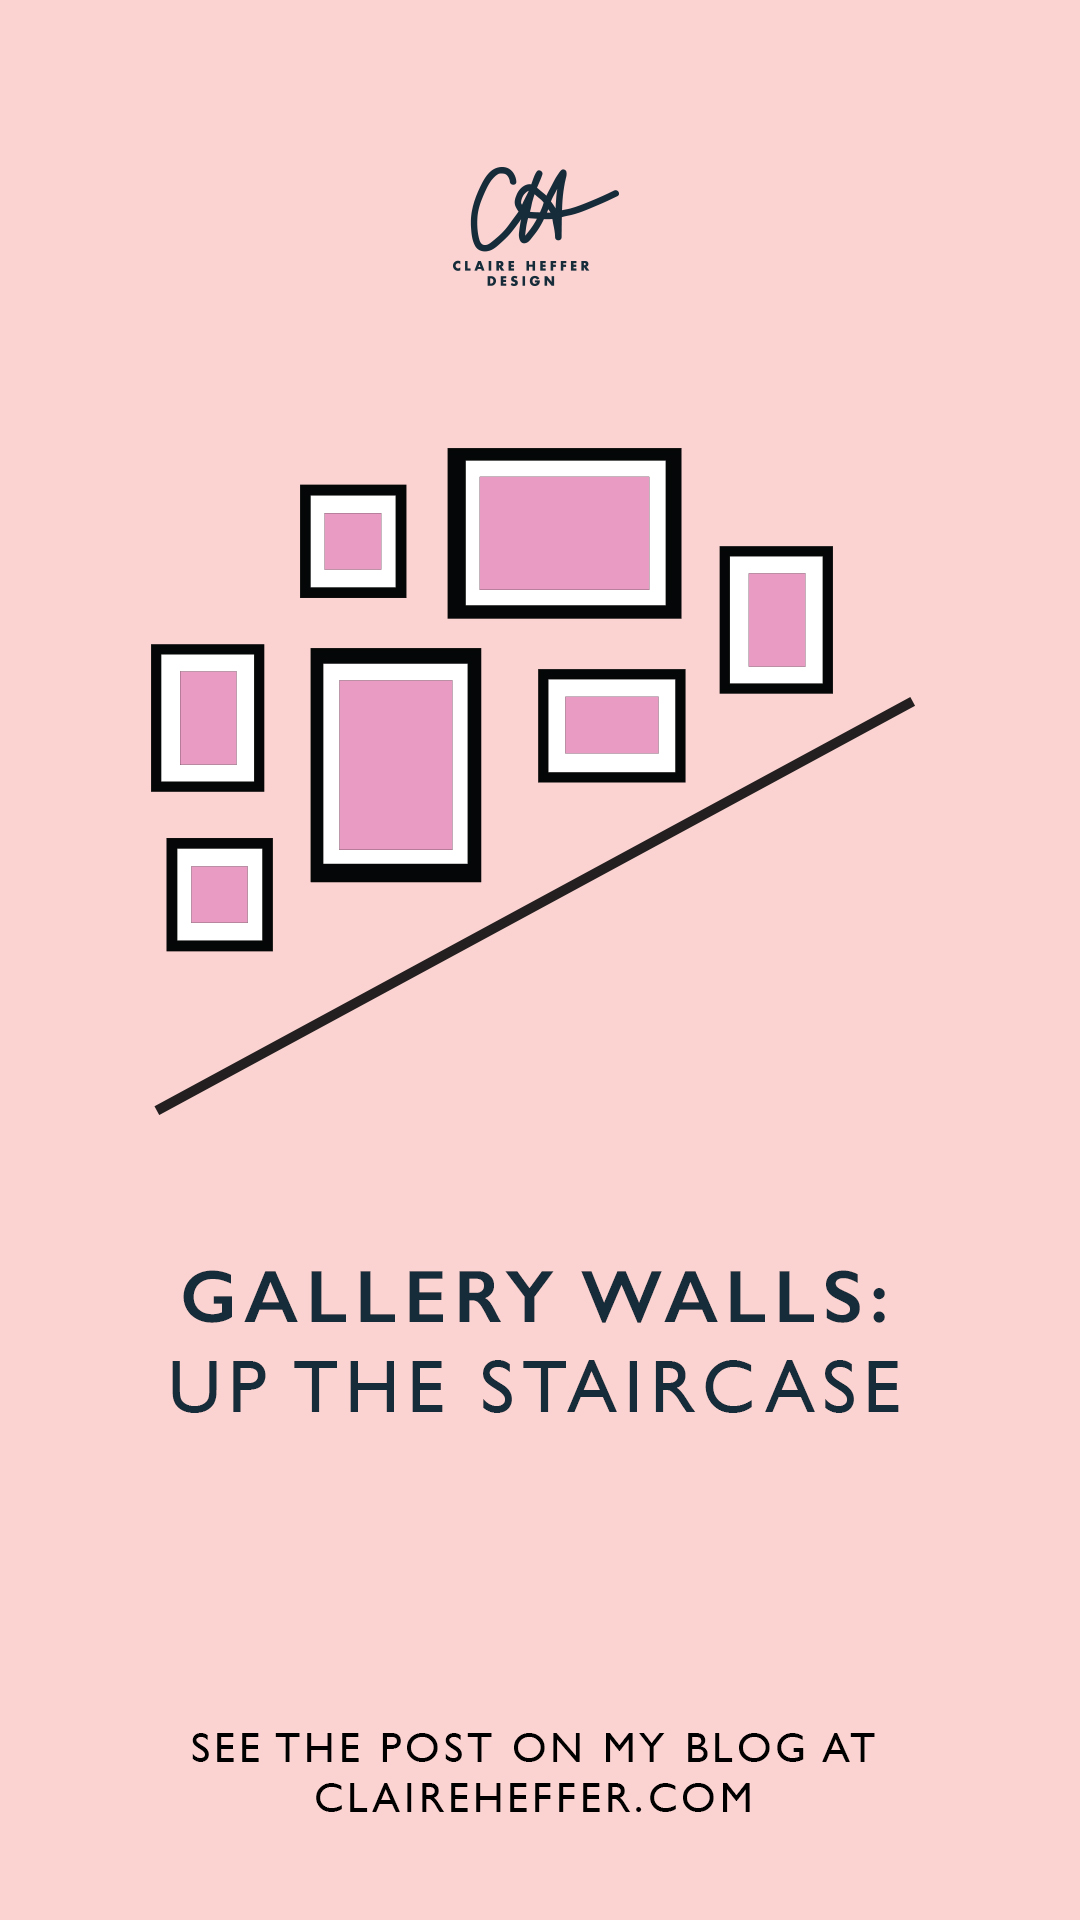 GALLERY WALLS UP THE STAIRCASE.jpg